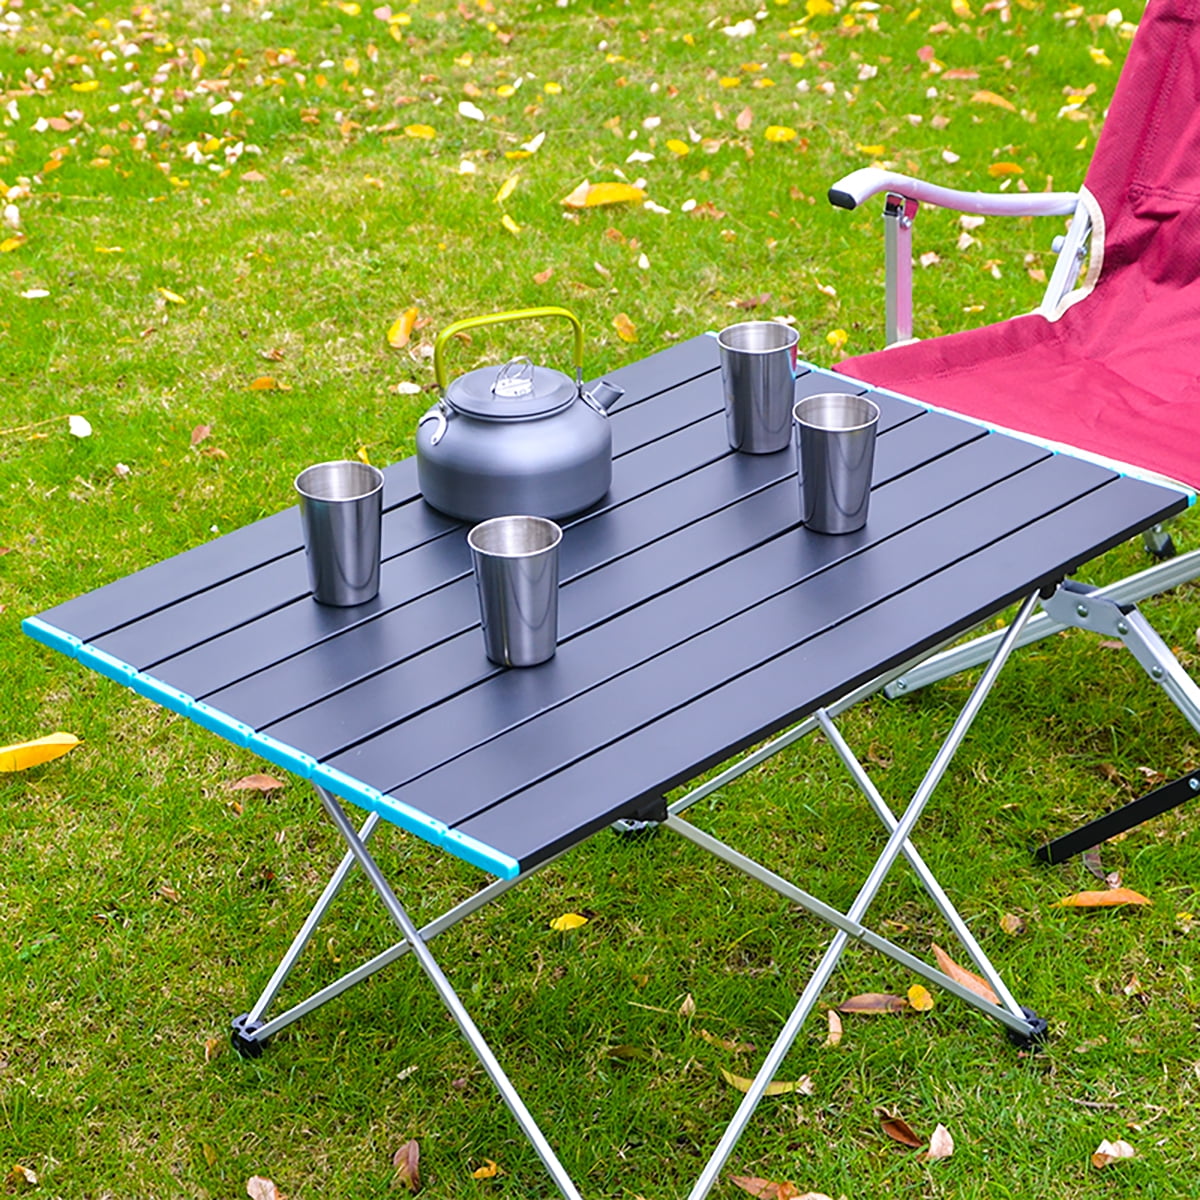 Fishing and Travel Silver, 1x BBQ Camping Table,Fold Up Table,Portable Compact Roll Top Aluminum Table,Lightweight Picnic Table with Carry Bag for Hiking 